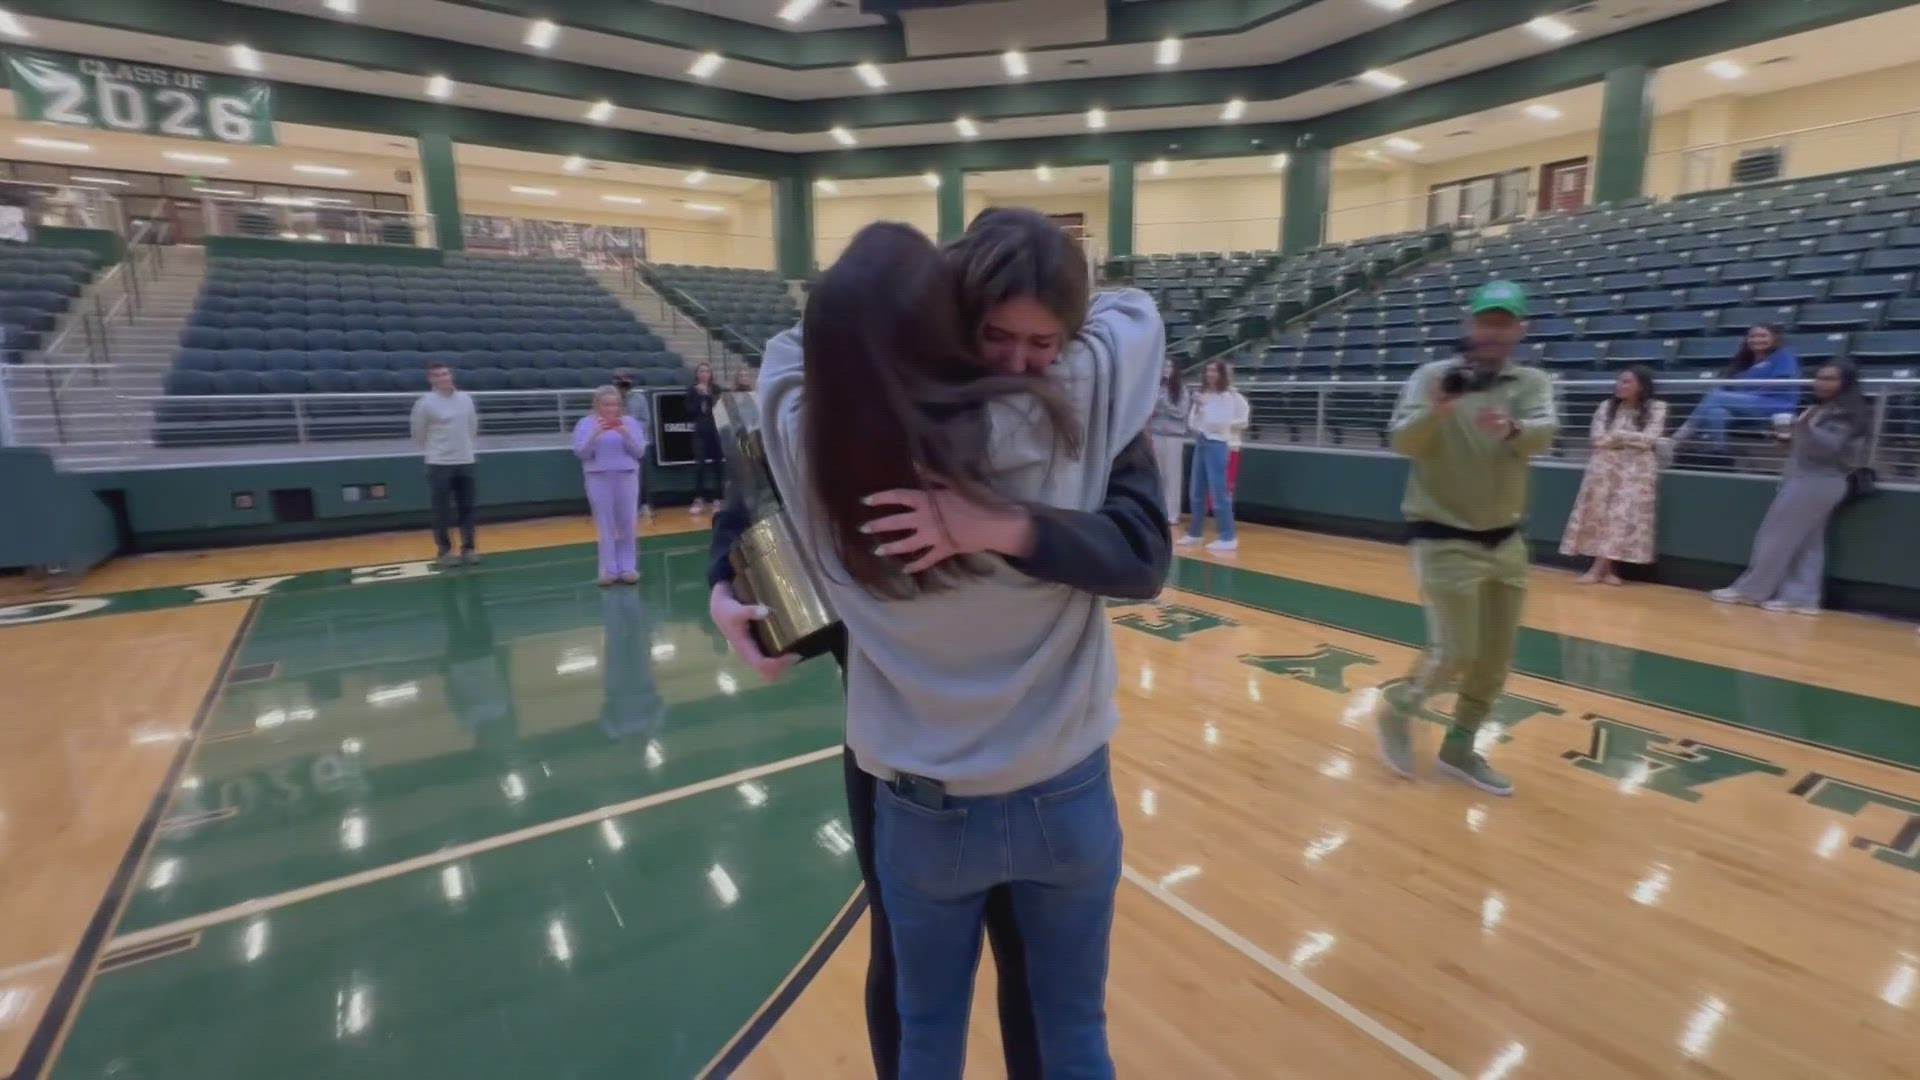 The senior on her way to Texas was surprised with the honor on Tuesday inside the Prosper gymnasium.